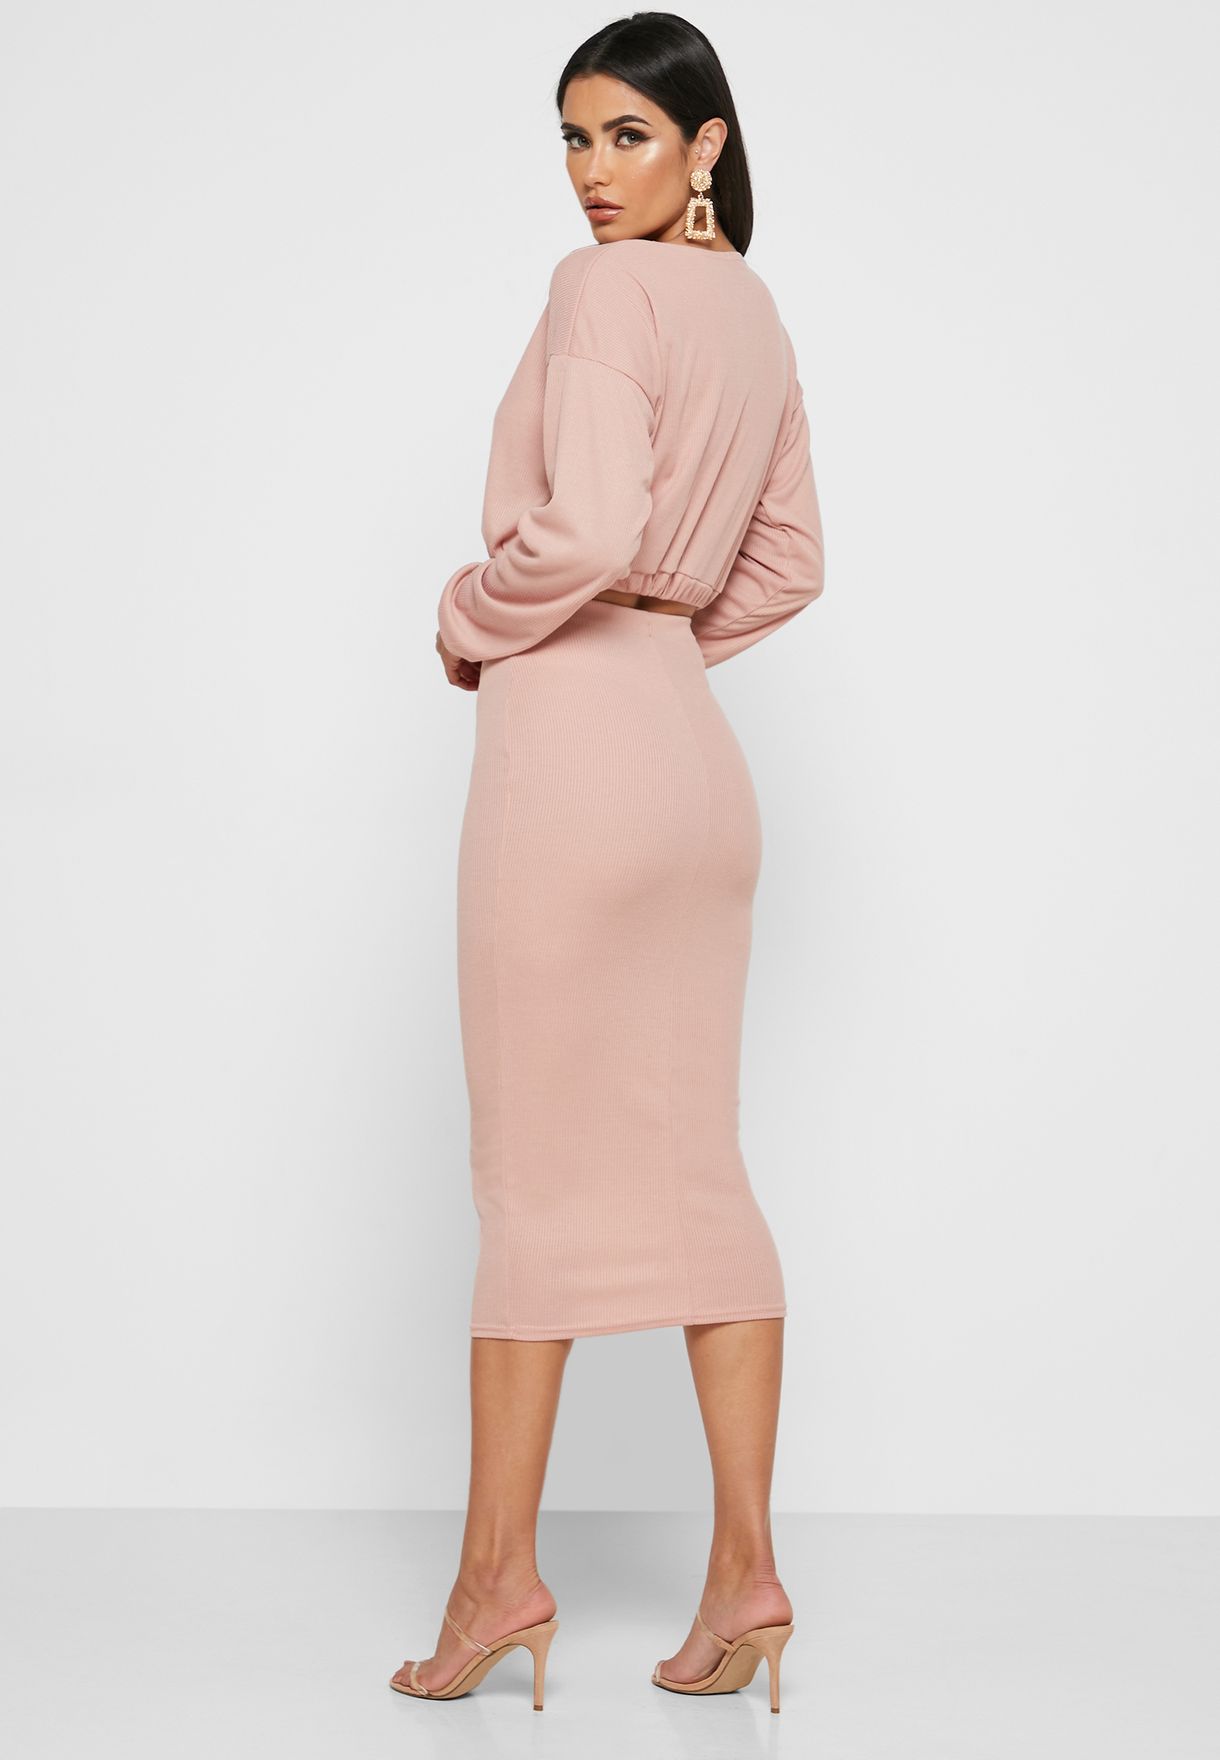 Buy Missguided Pink Ribbed Crop Top Skirt Set For Women In Riyadh Jeddah